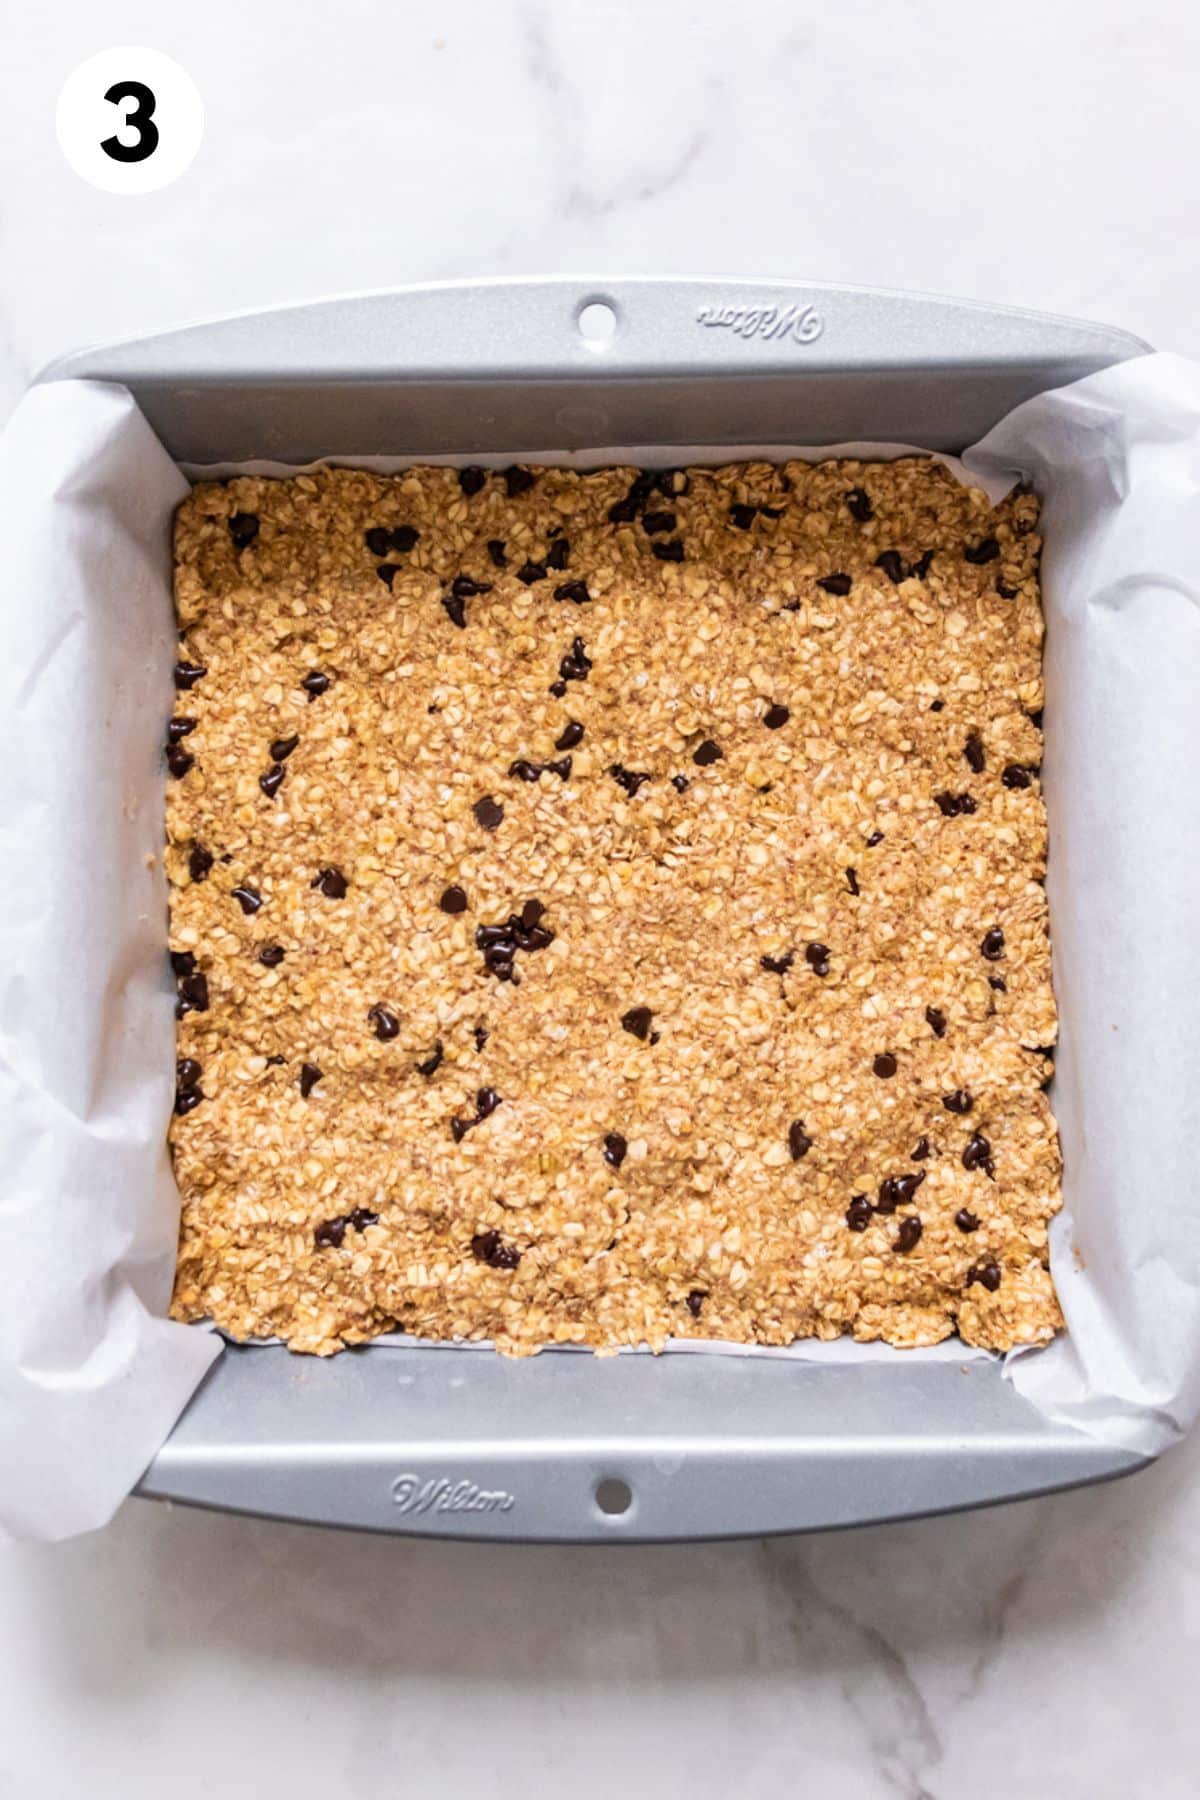 Mixture to make protein breakfast bars pressed into a square pan.